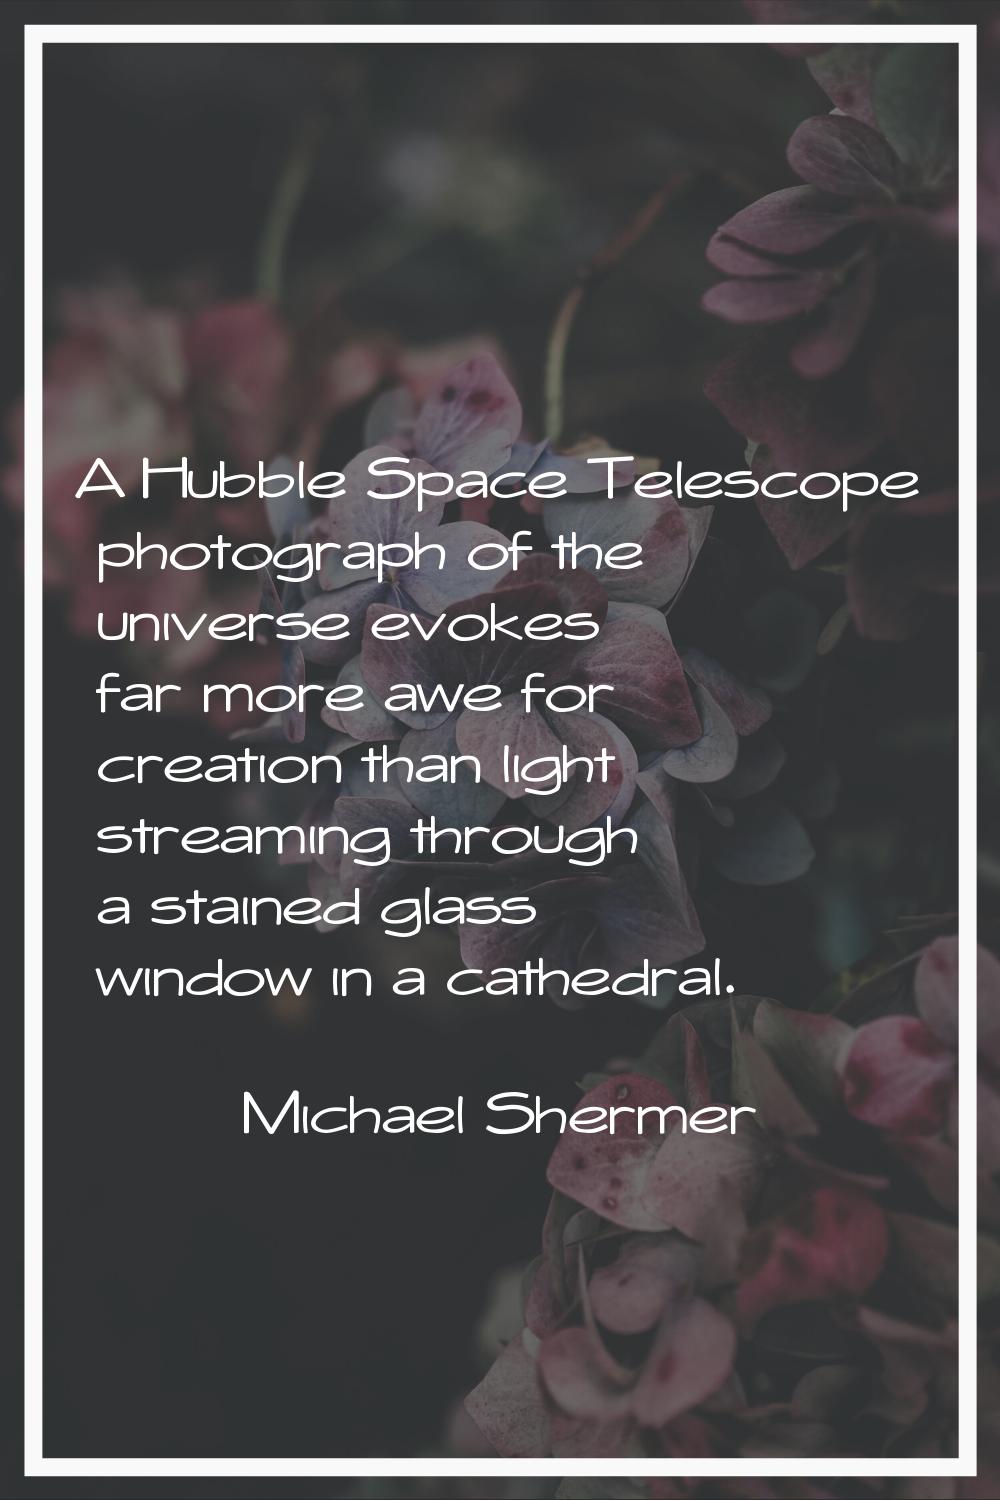 A Hubble Space Telescope photograph of the universe evokes far more awe for creation than light str